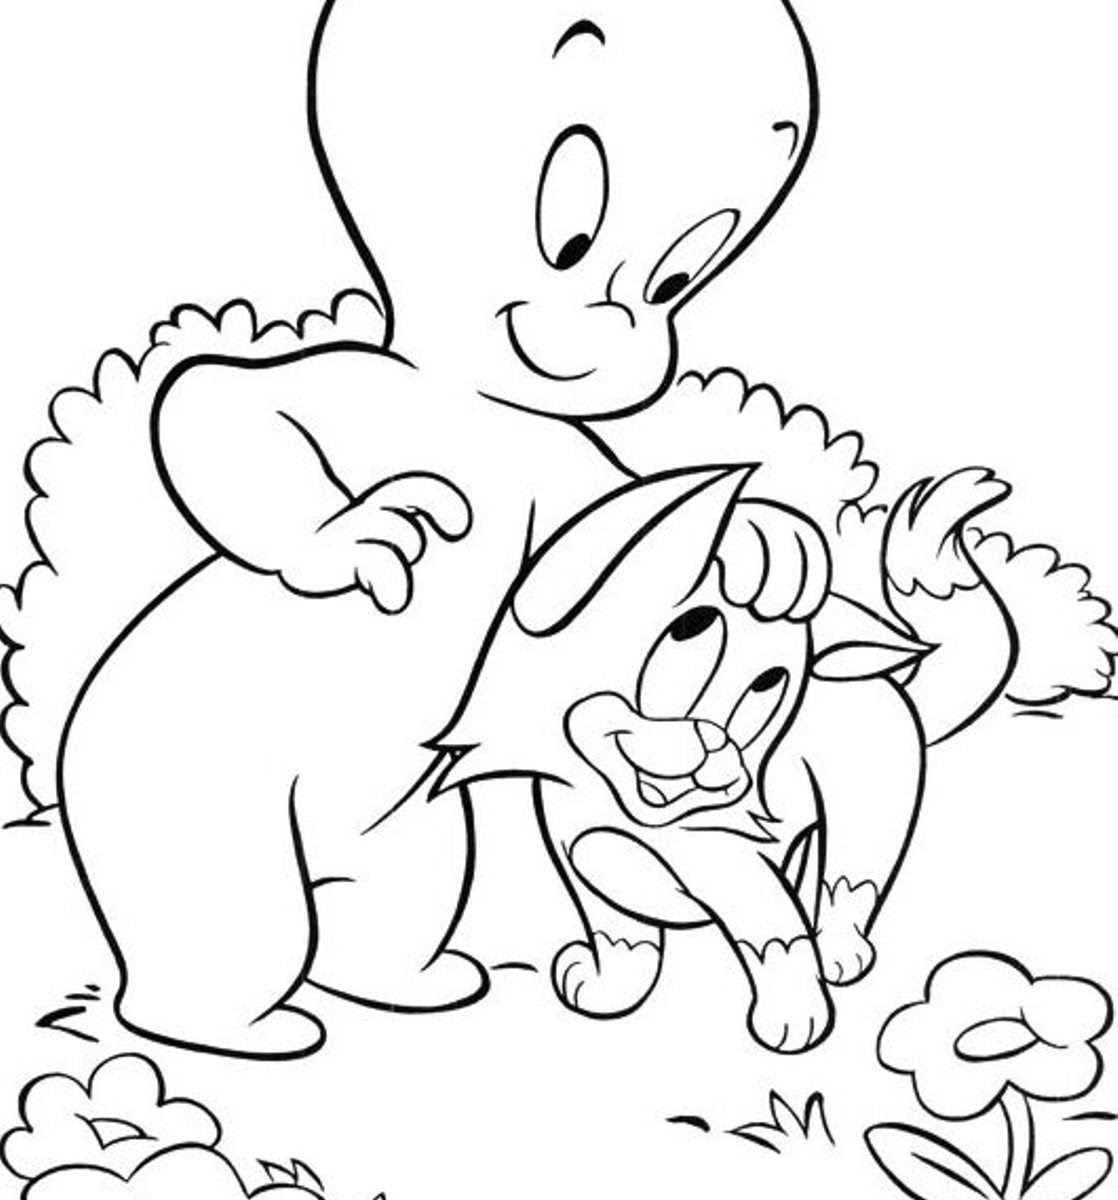 Download Best Coloring Pages Site: Casper With Gf Coloring Pages ...